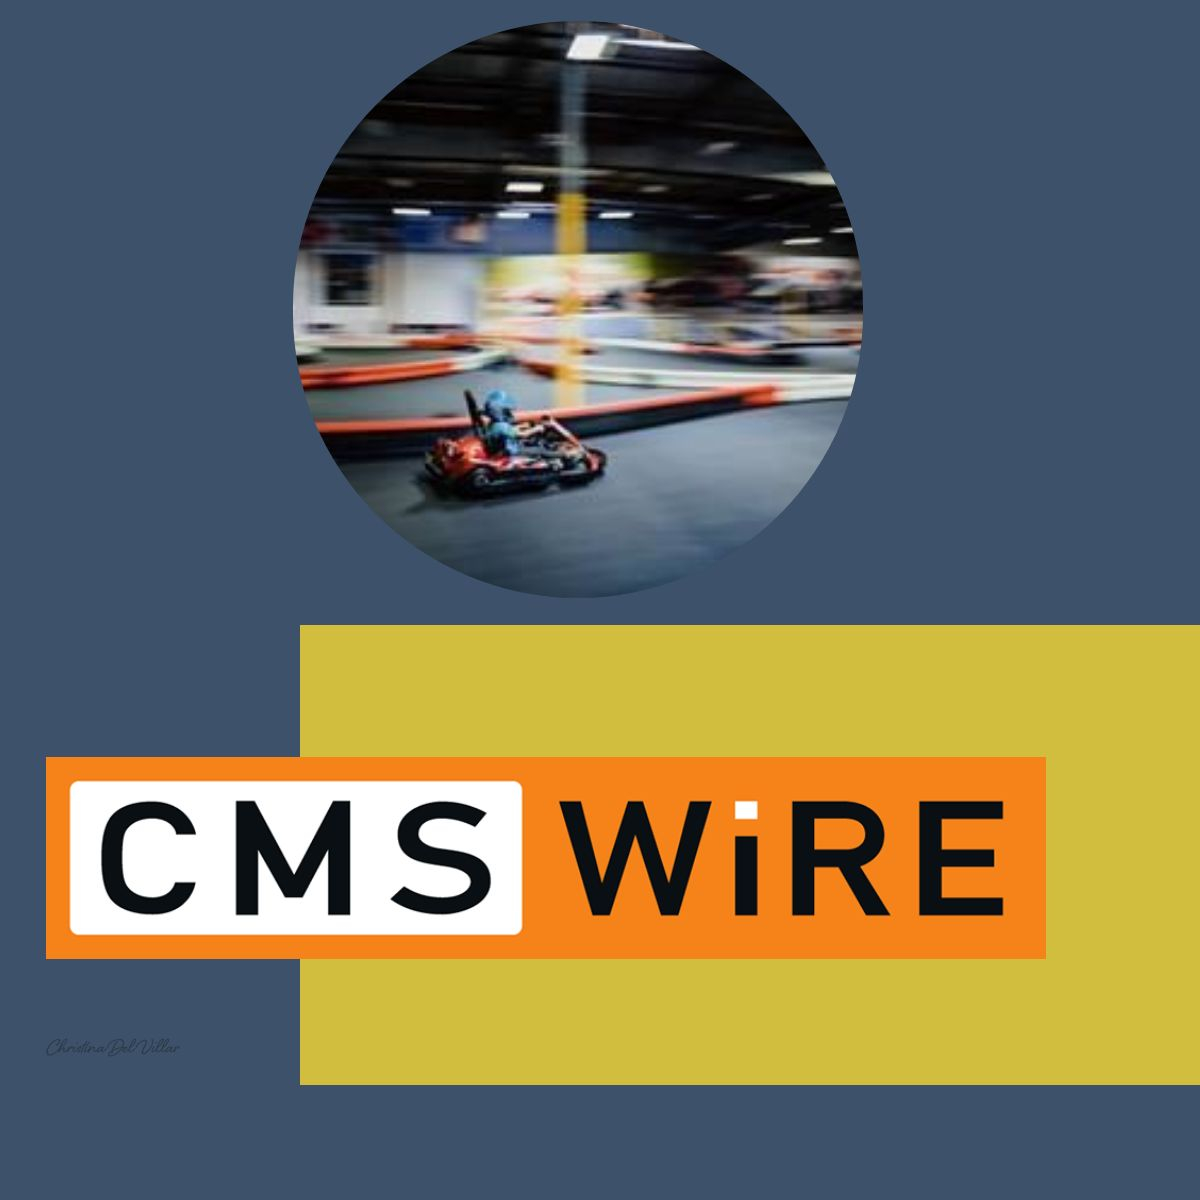 CMS Wire: So You Think You Have a Go-to-Market Strategy?